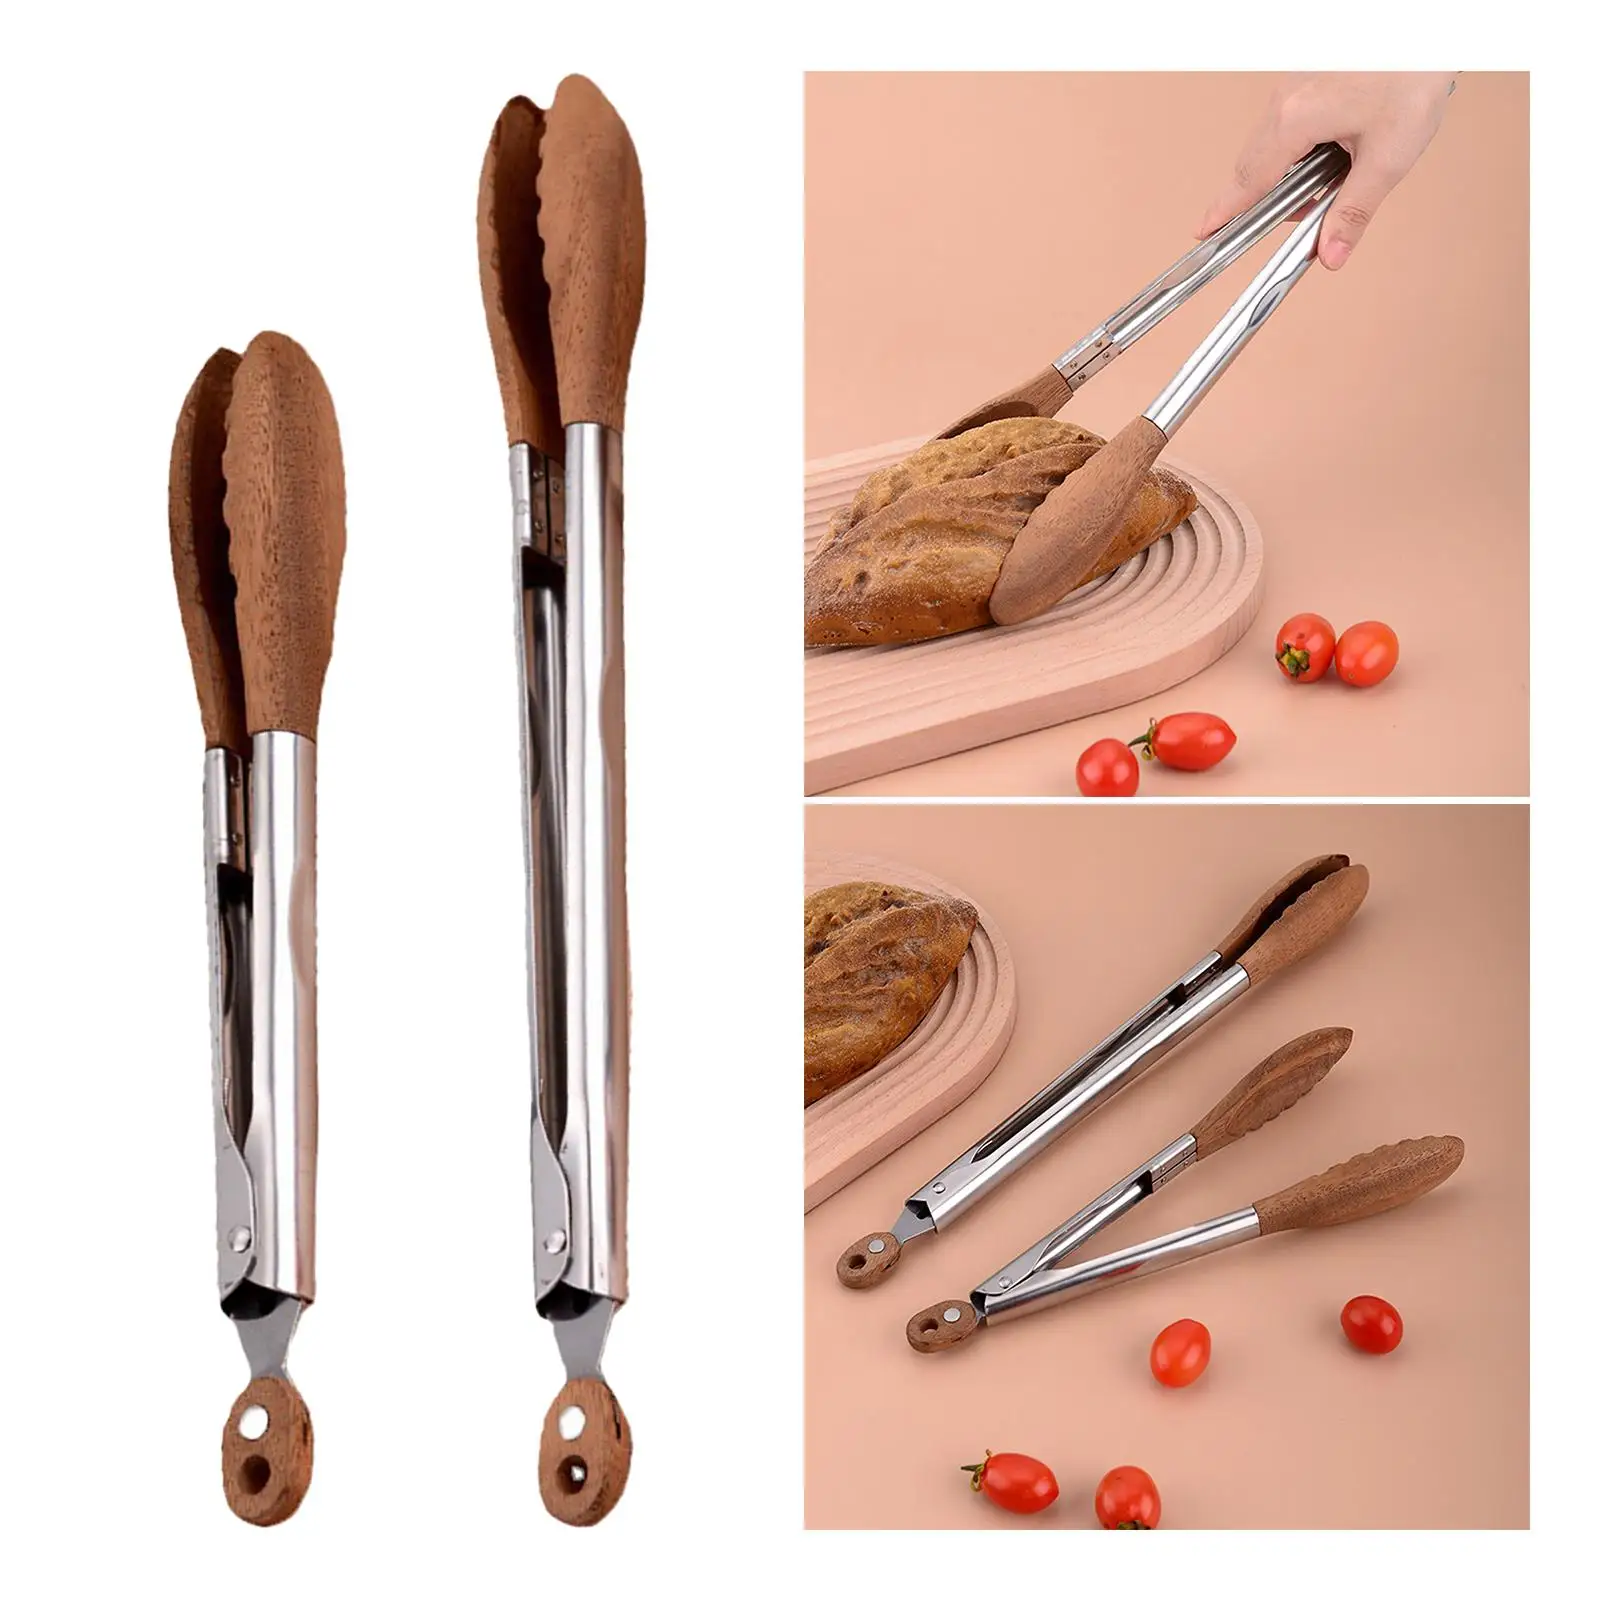 Kitchen Tongs Utensils Salads Tools Kitchenware Kitchen Utensils Serving Tongs Grilling Clip for Home Bakery Restaurant Party